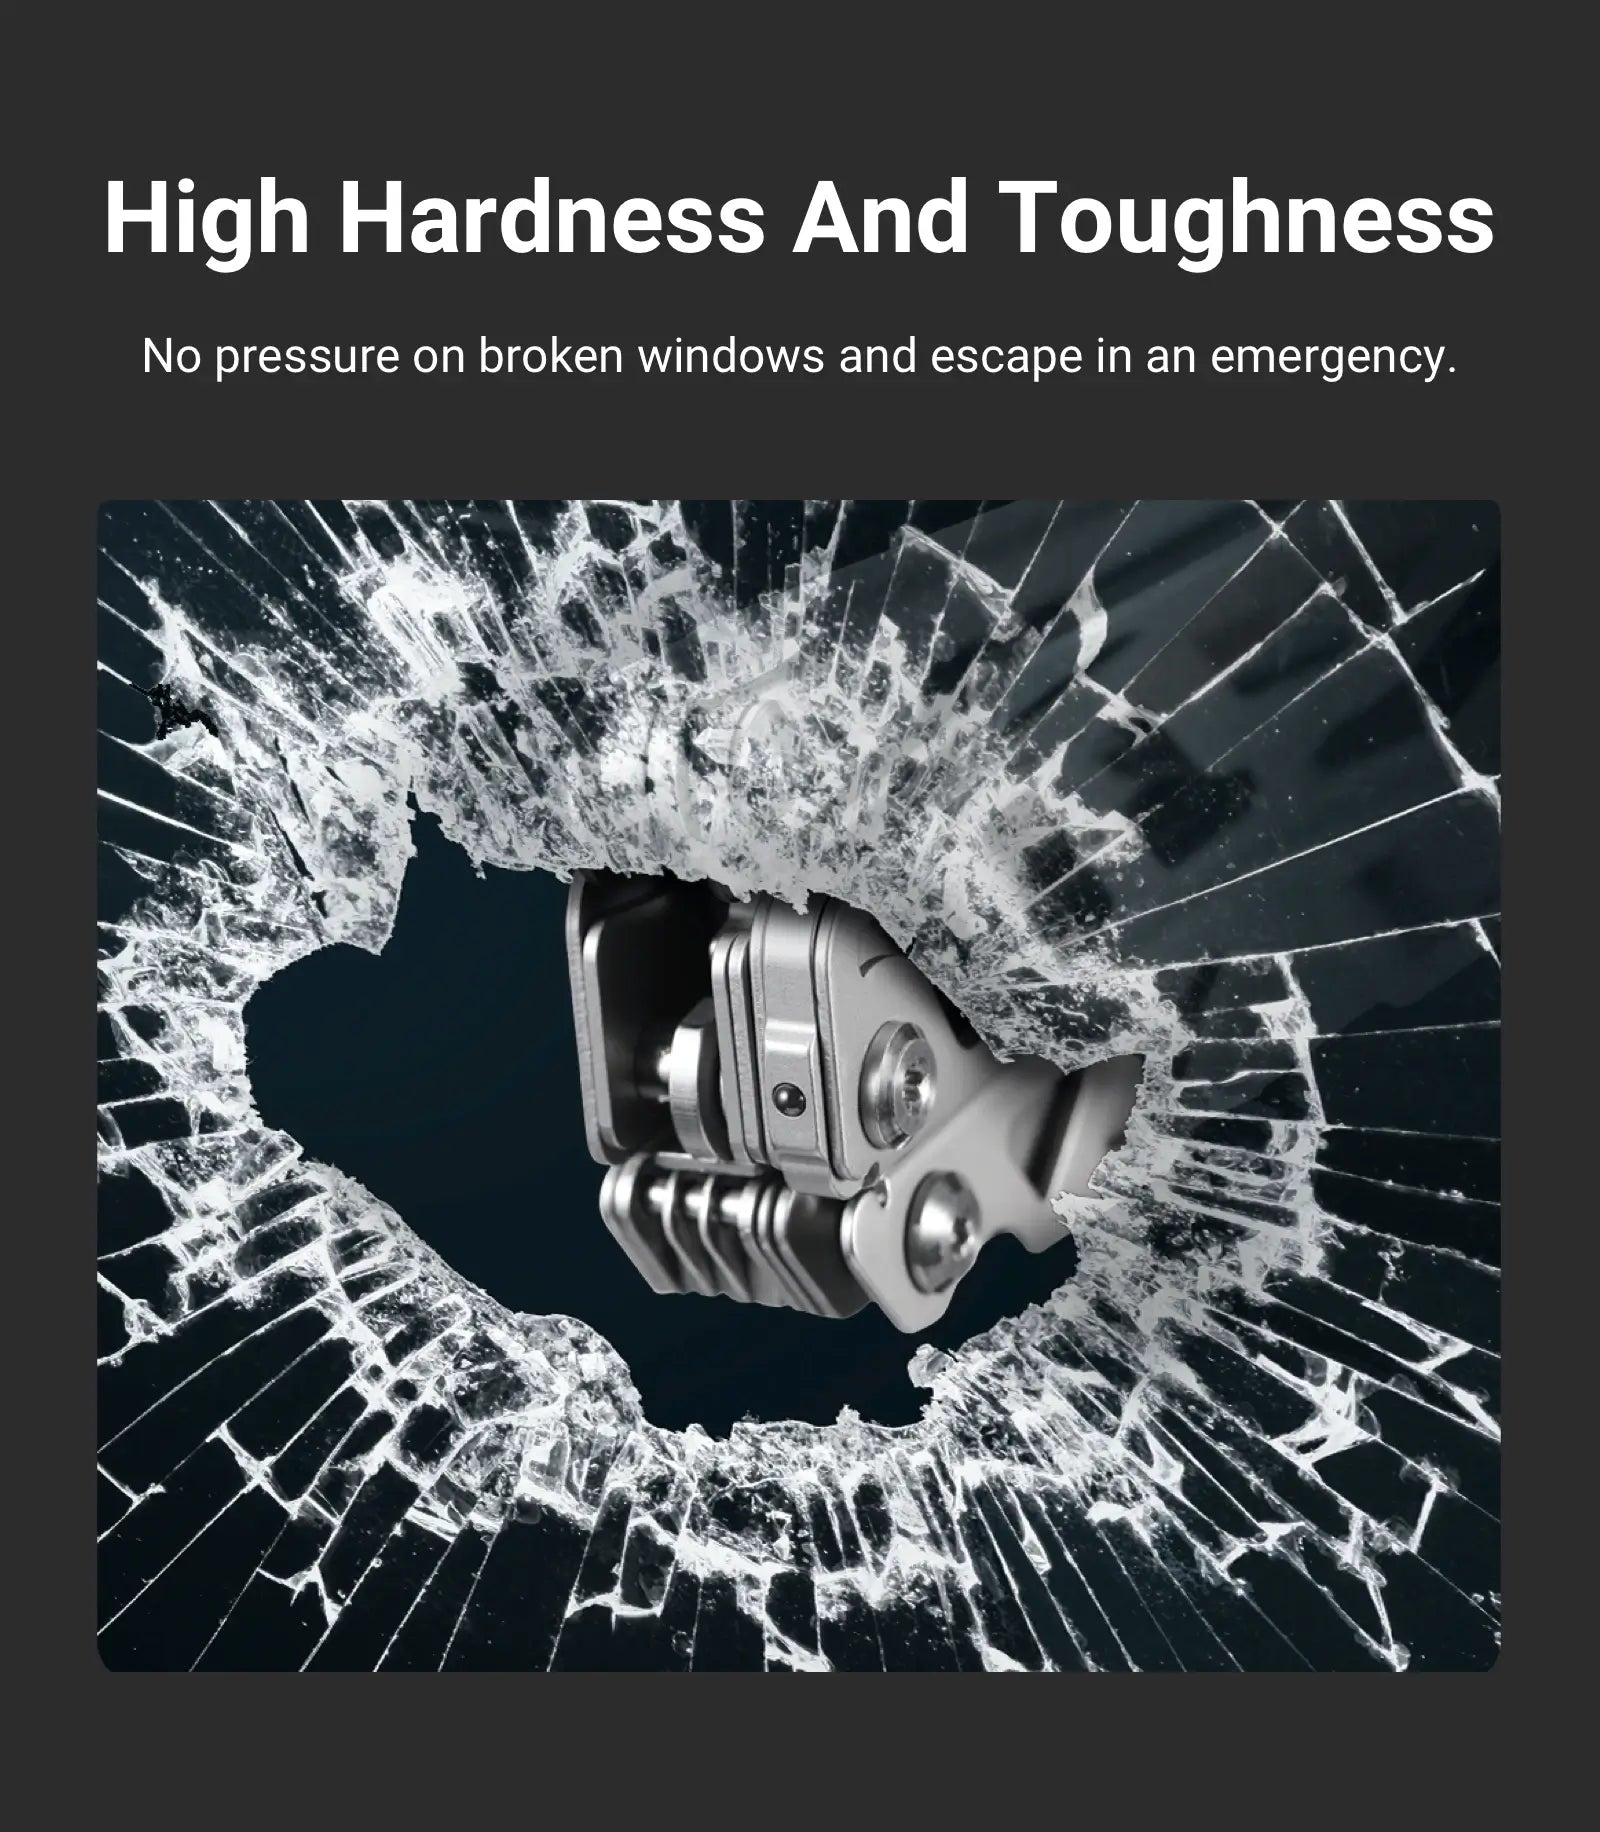 High Hardness And Toughness